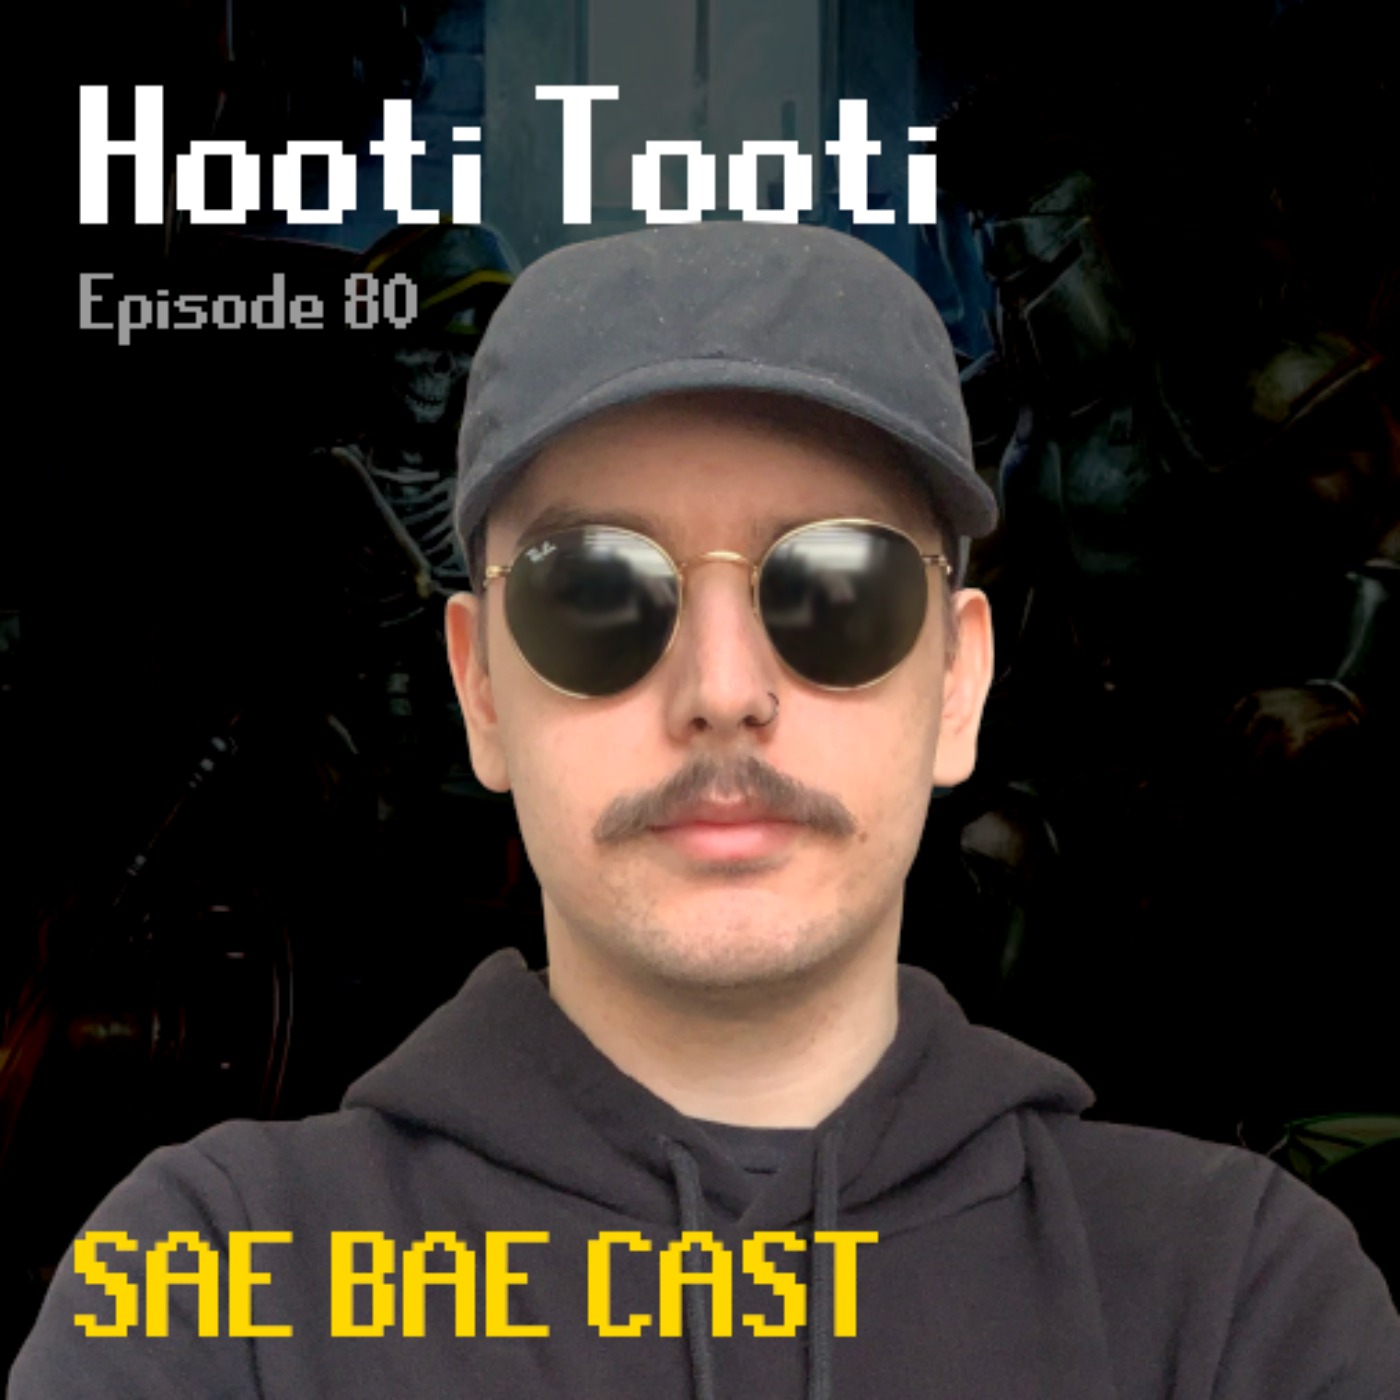 Hooti Tooti - Speedrun Cup 2022, Tombs of Amascut, Artistic Talent in OSRS | Sae Bae Cast 80